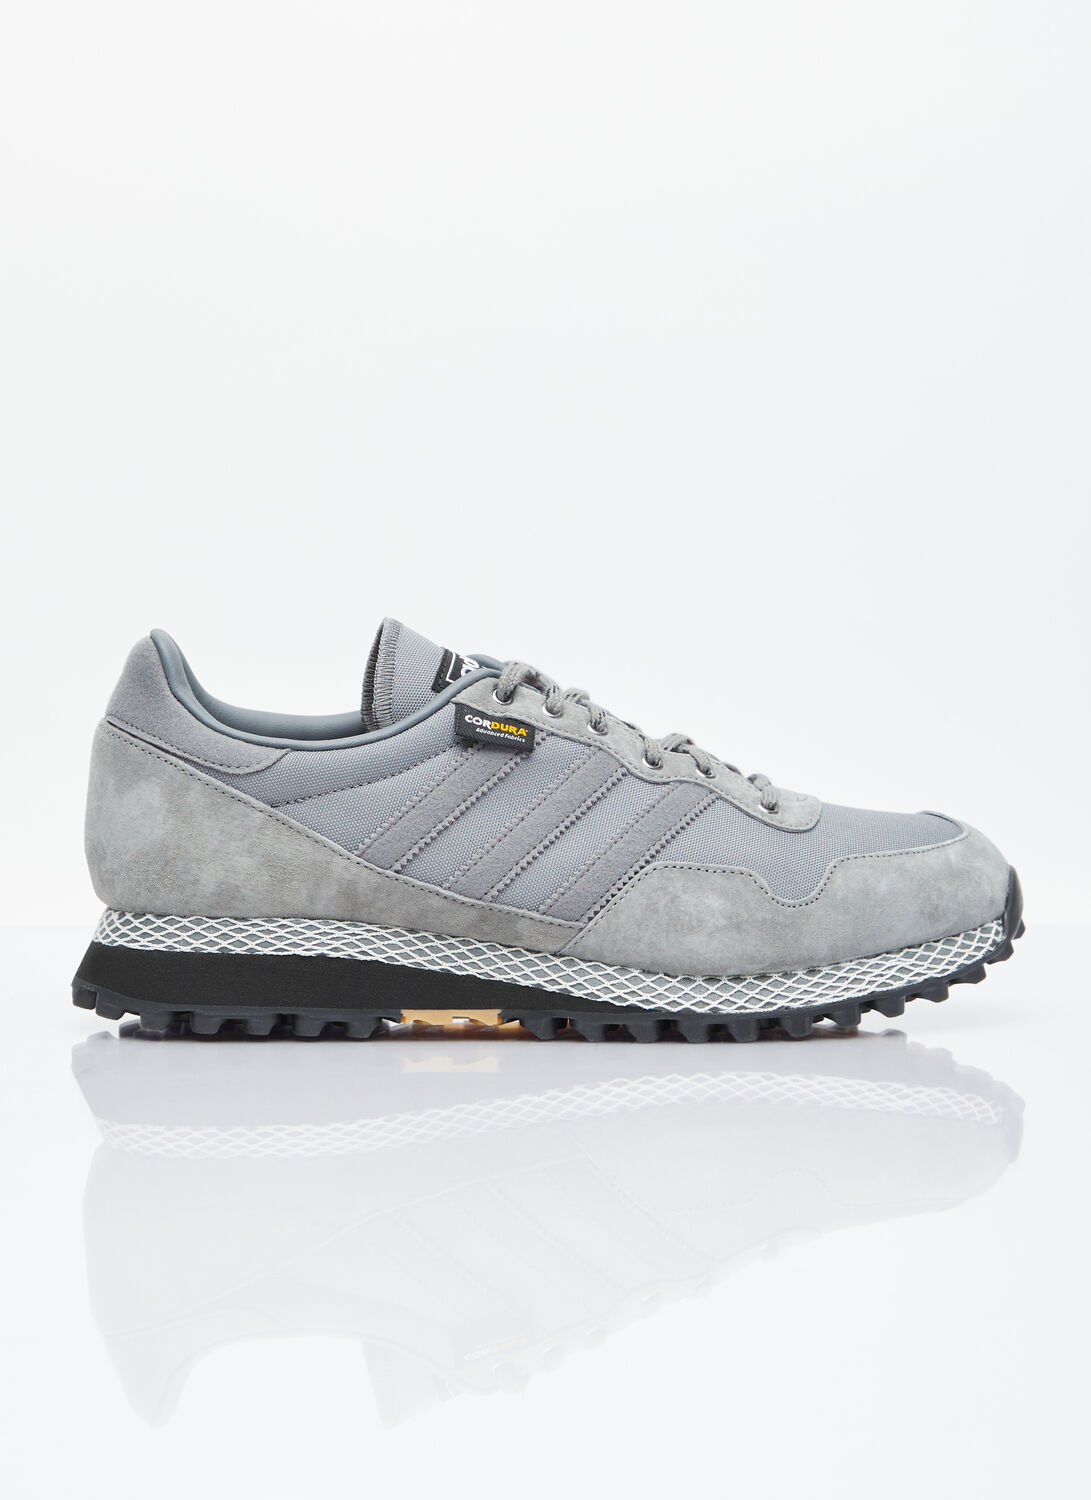 Adidas Originals By Spezial Moscrop Spezial Trainers In Grey